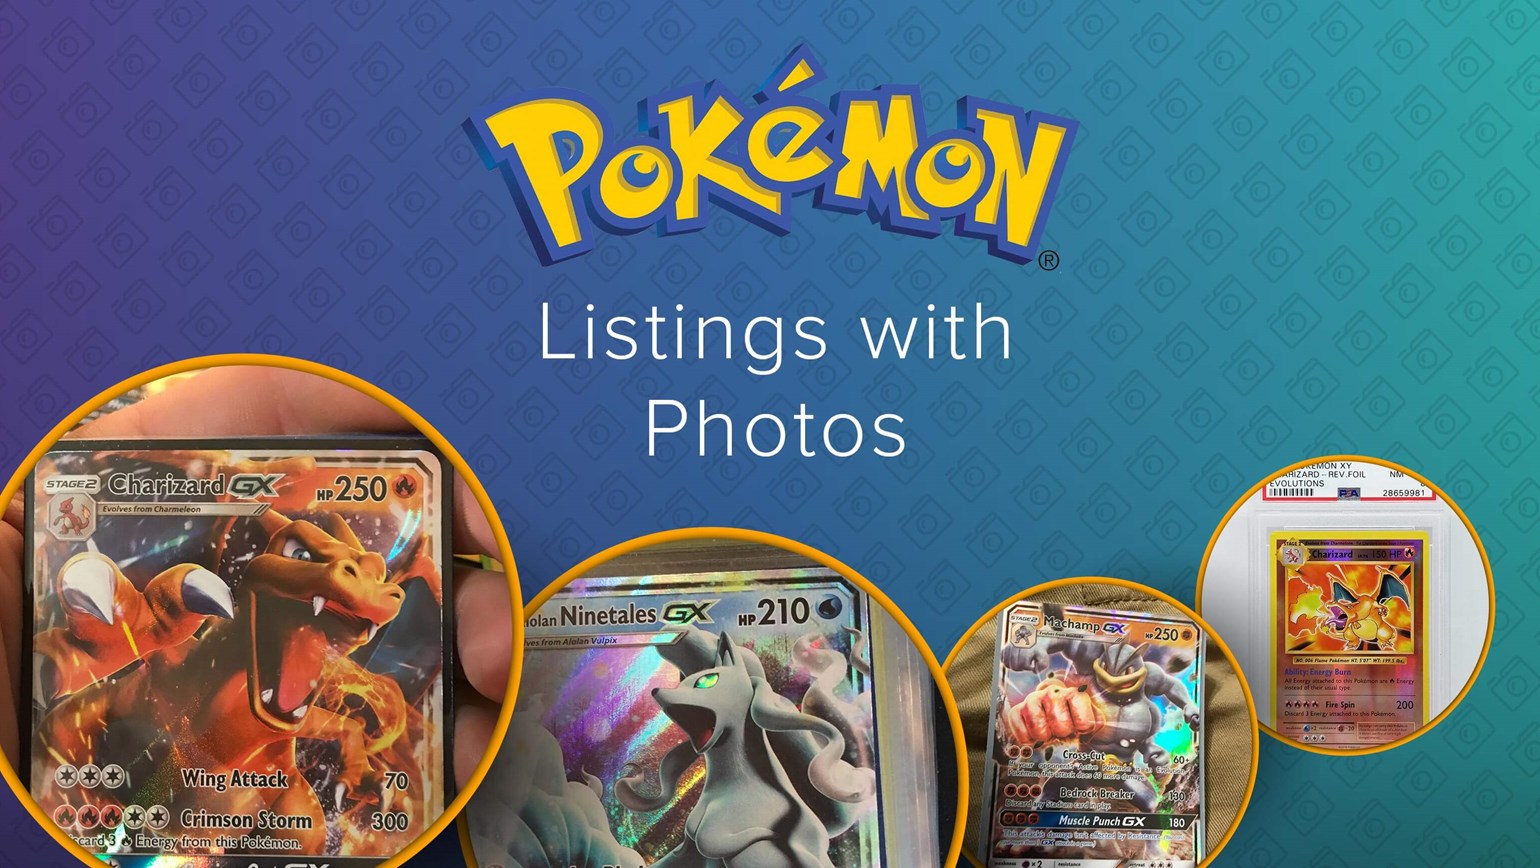 Take Your Pokémon Sales to the Next Level with Listings with Photos